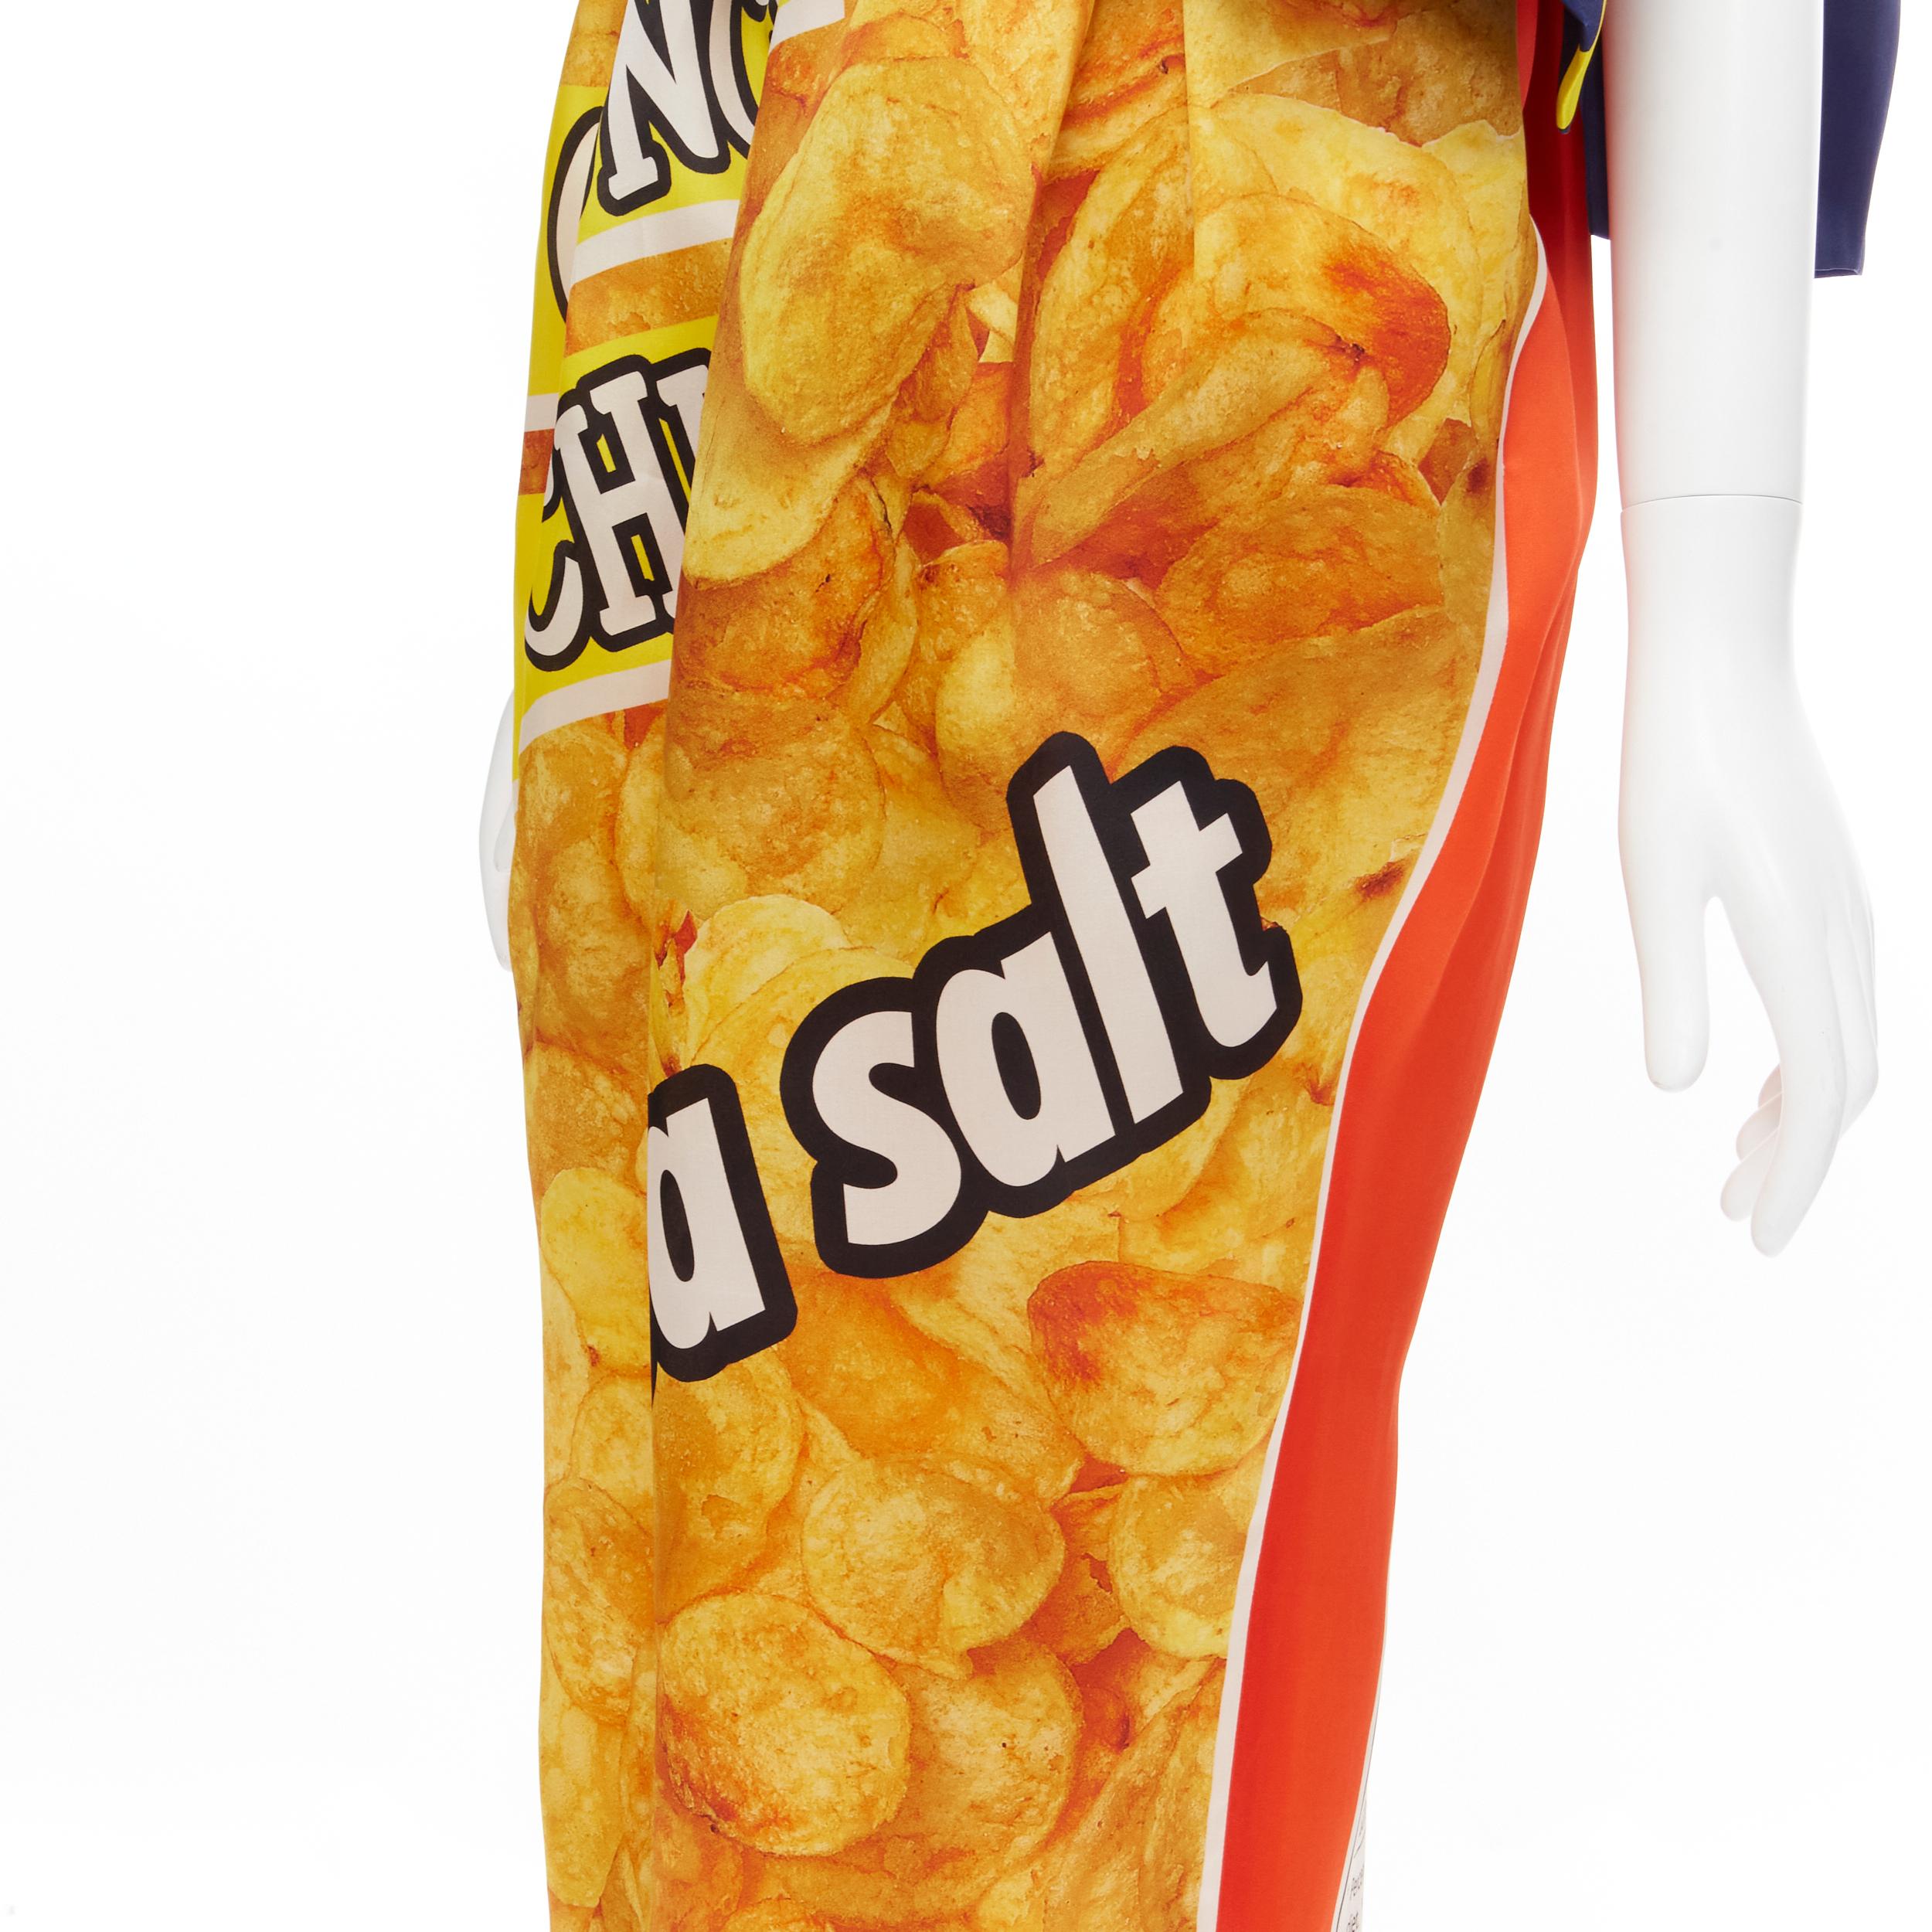 rare MOSCHINO Couture! 2014 Junk Food Potato Chip ruffle one shoulder gown dress In Excellent Condition For Sale In Hong Kong, NT